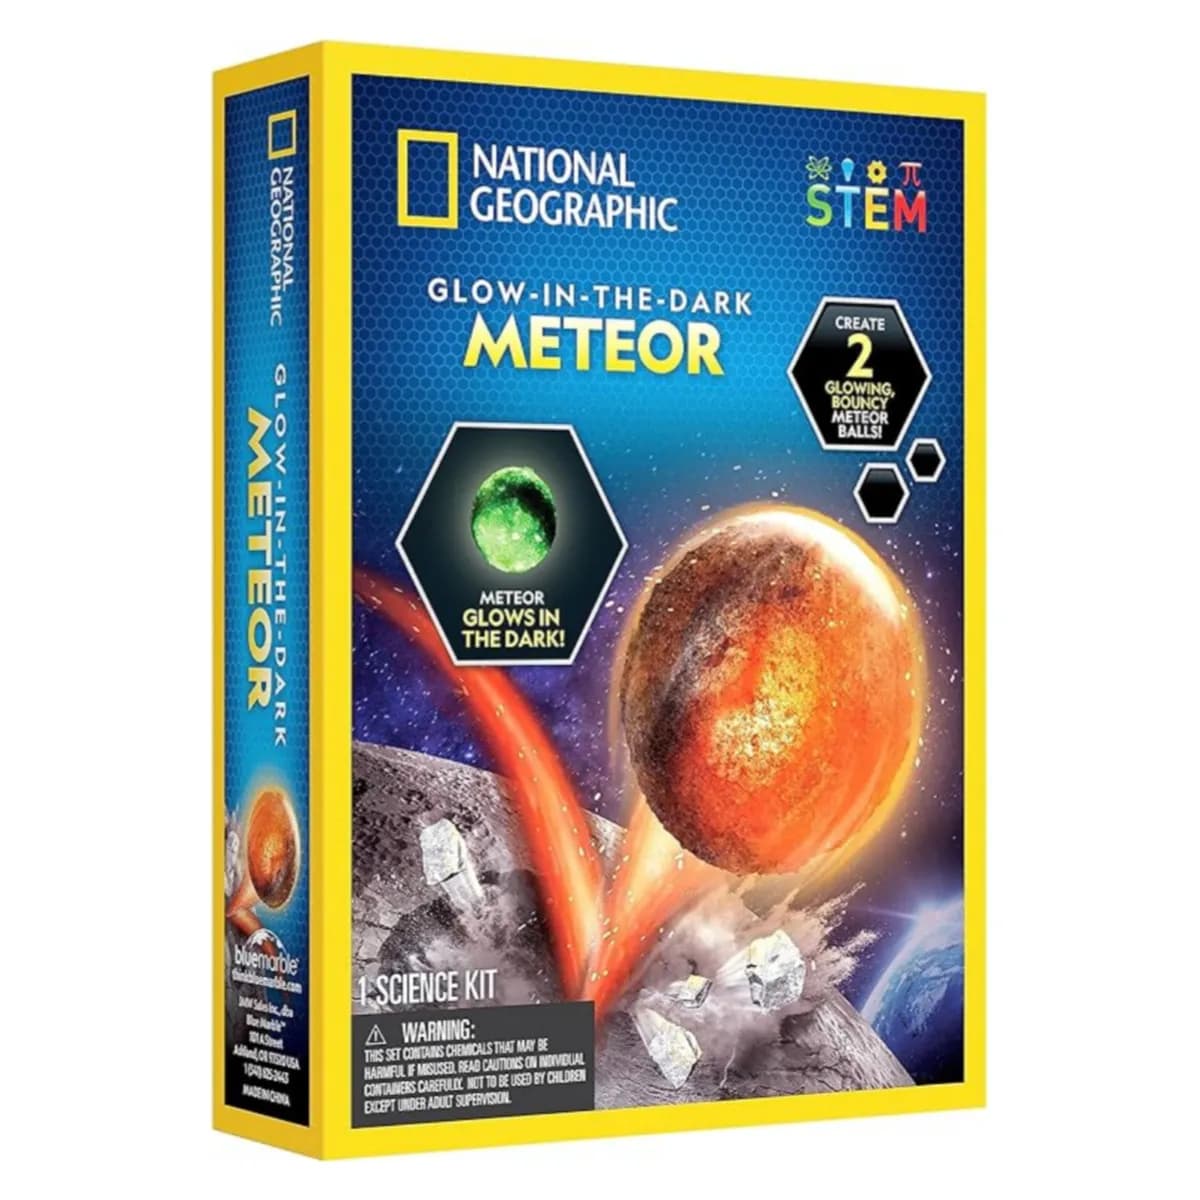 National Geographic Glow In The Dark Meteor Bouncy Balls for Student-Stem Project Toy (SMEQ28)